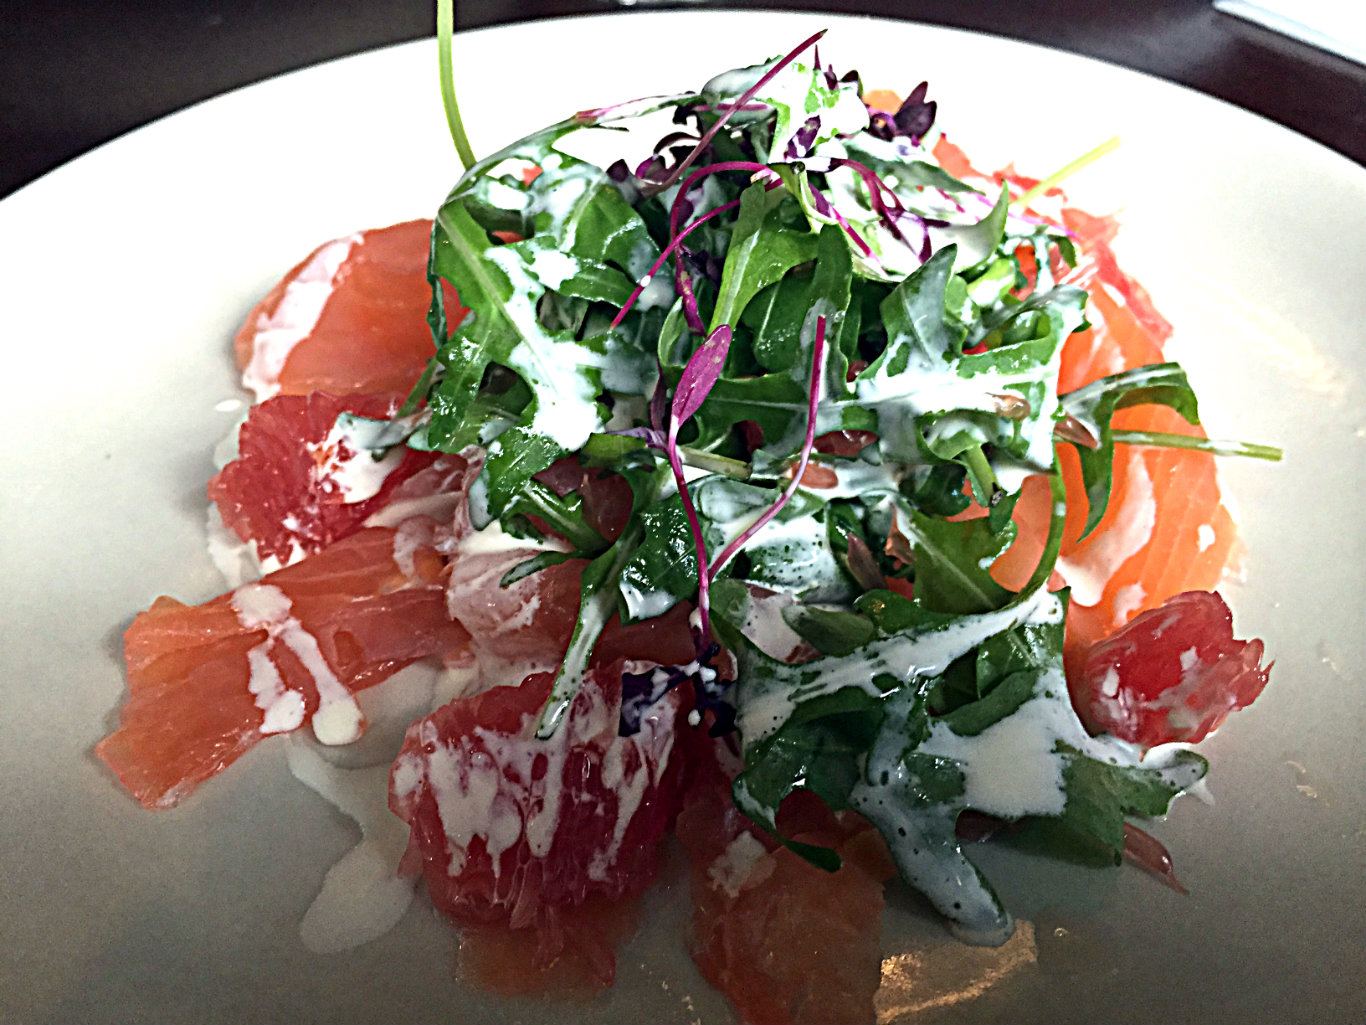 Pimped up with grapefruit and gin cream. Photo: SE